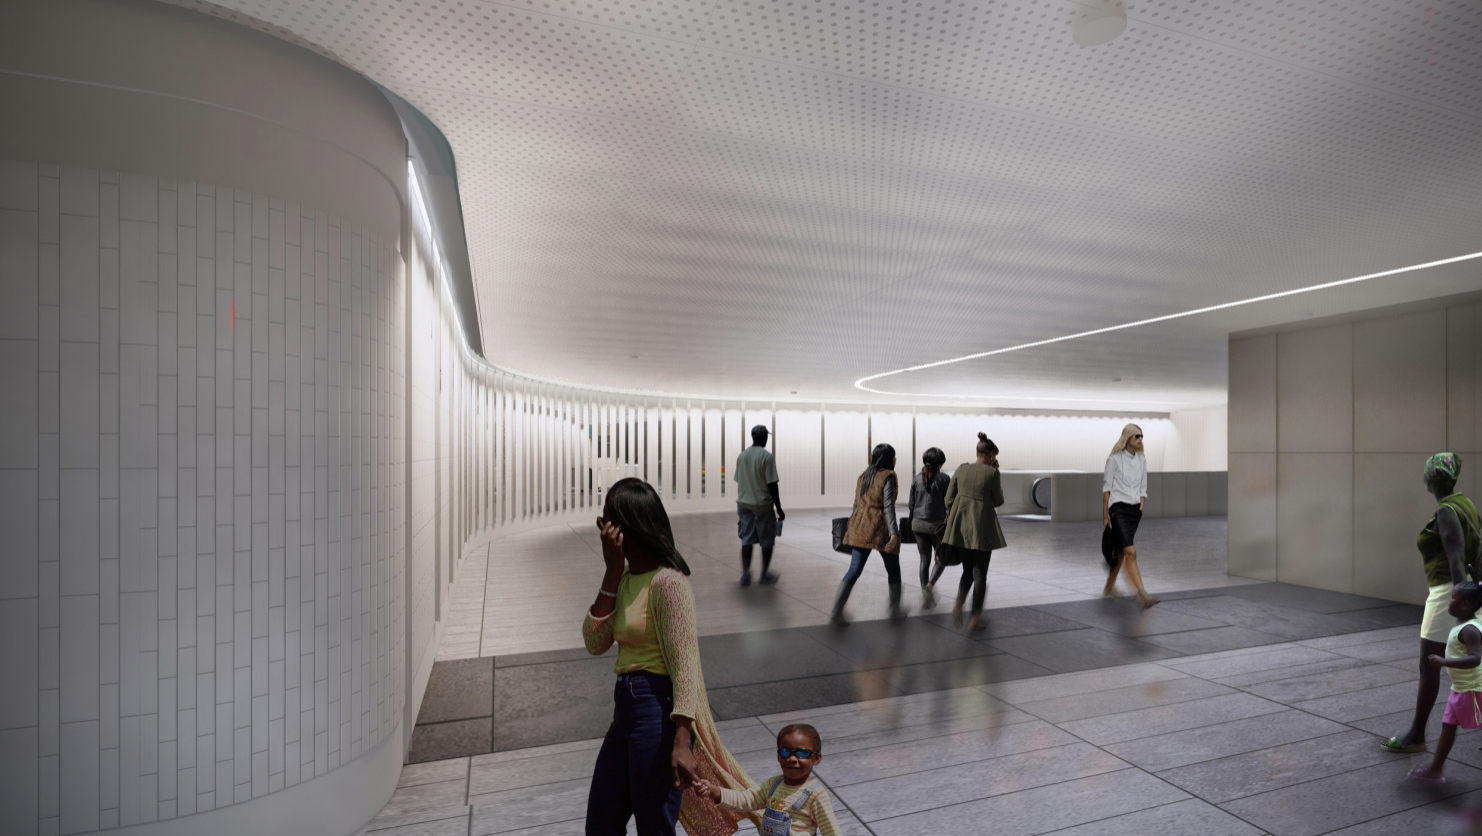 A rendering of a refurbished MARTA station with passengers and bright concourse 